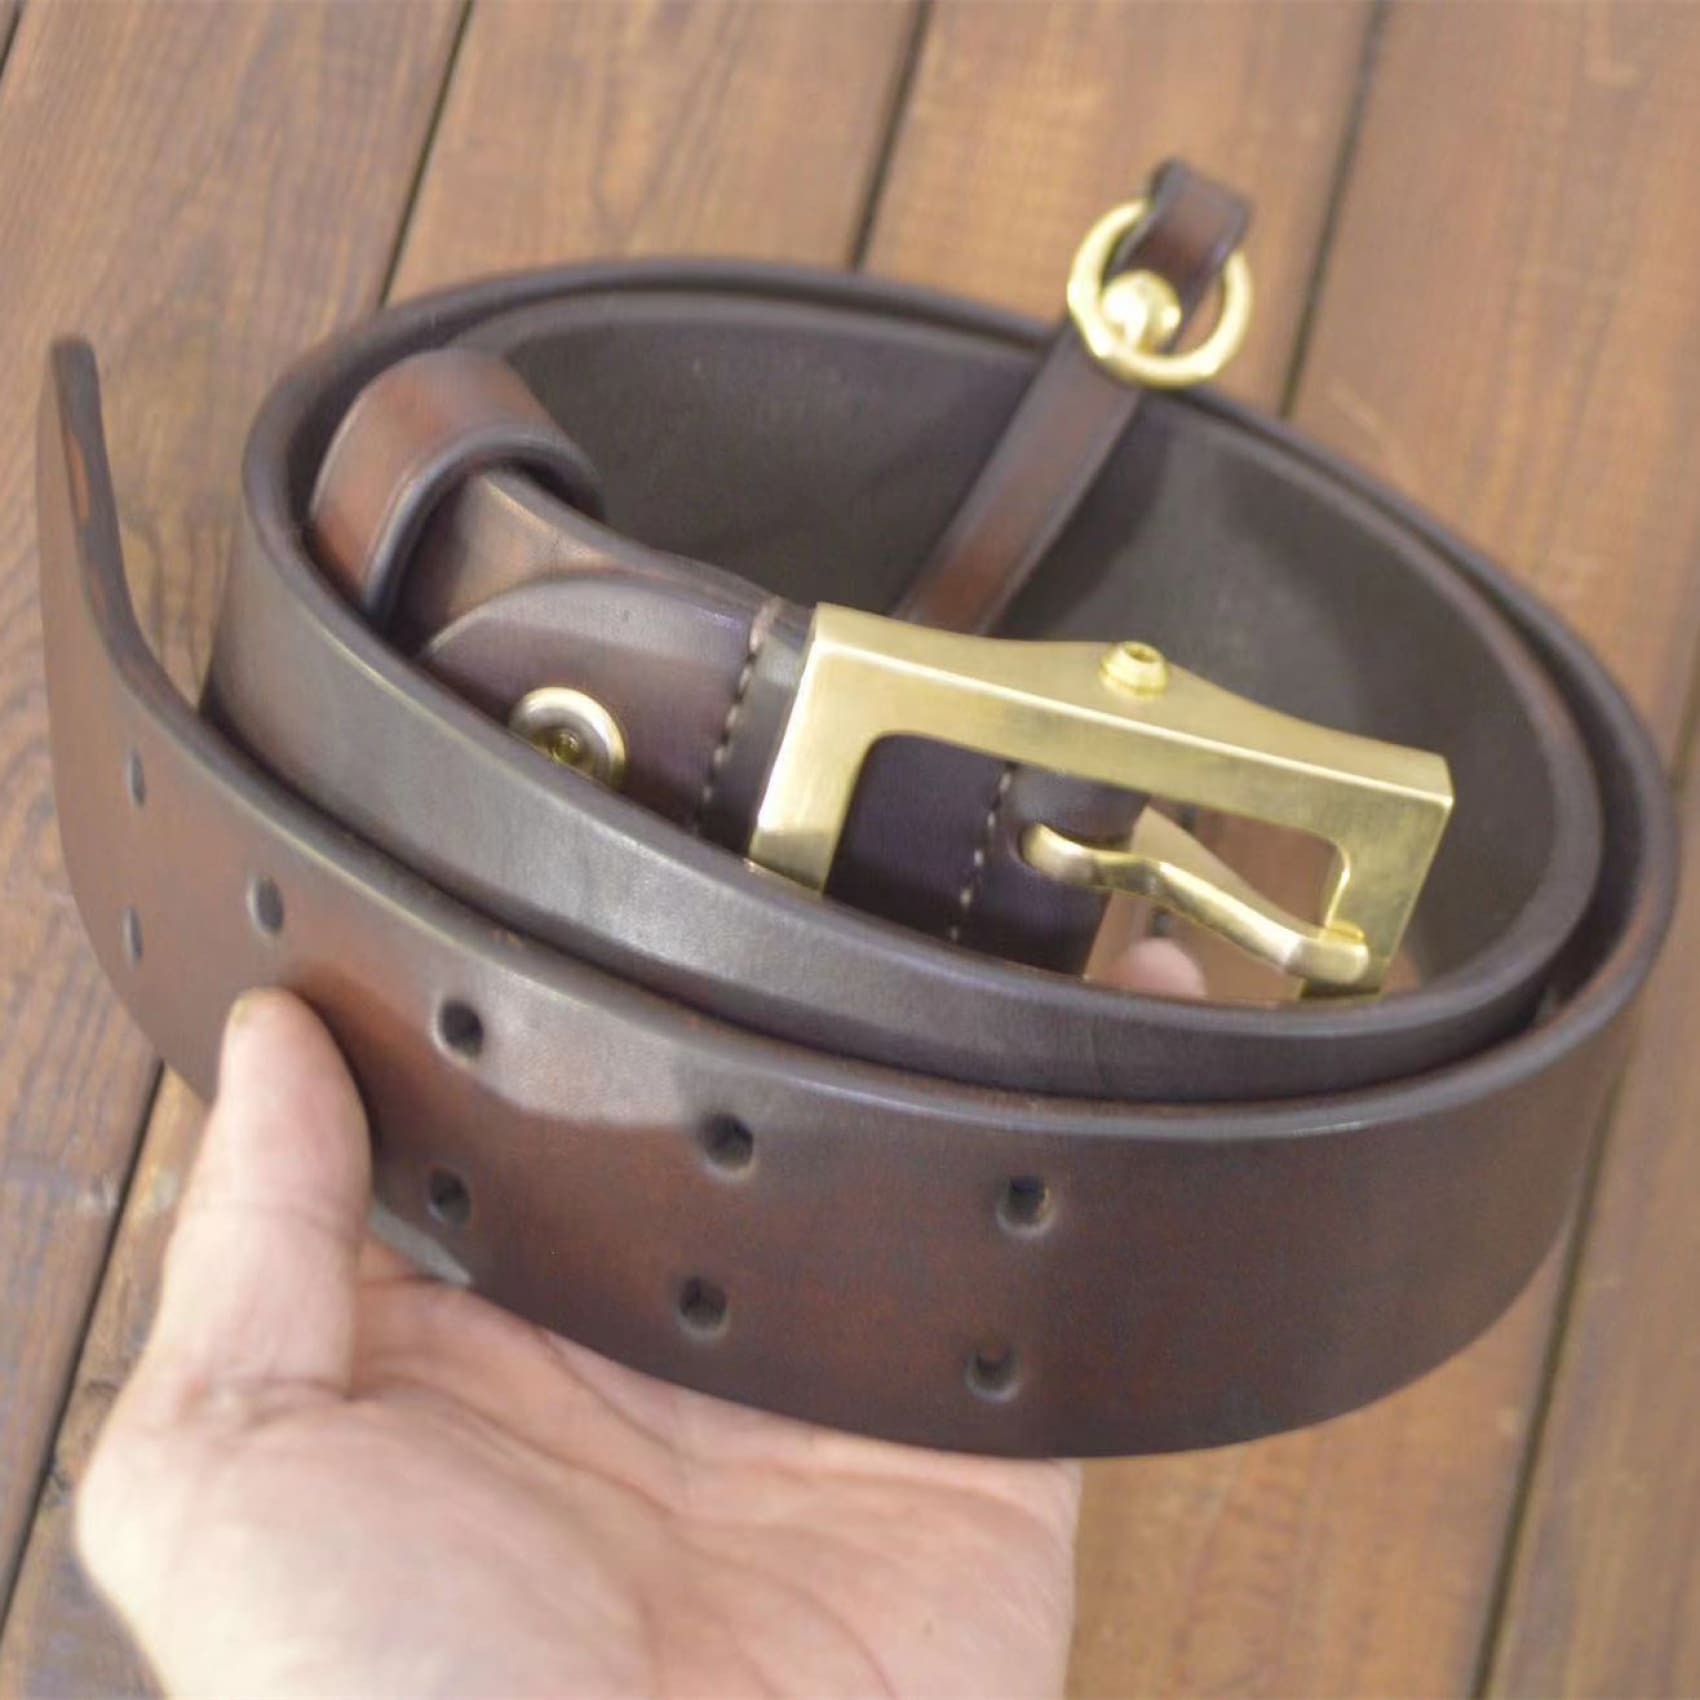 Customized Size Western Leather Belt with Durable Handmade Buckle